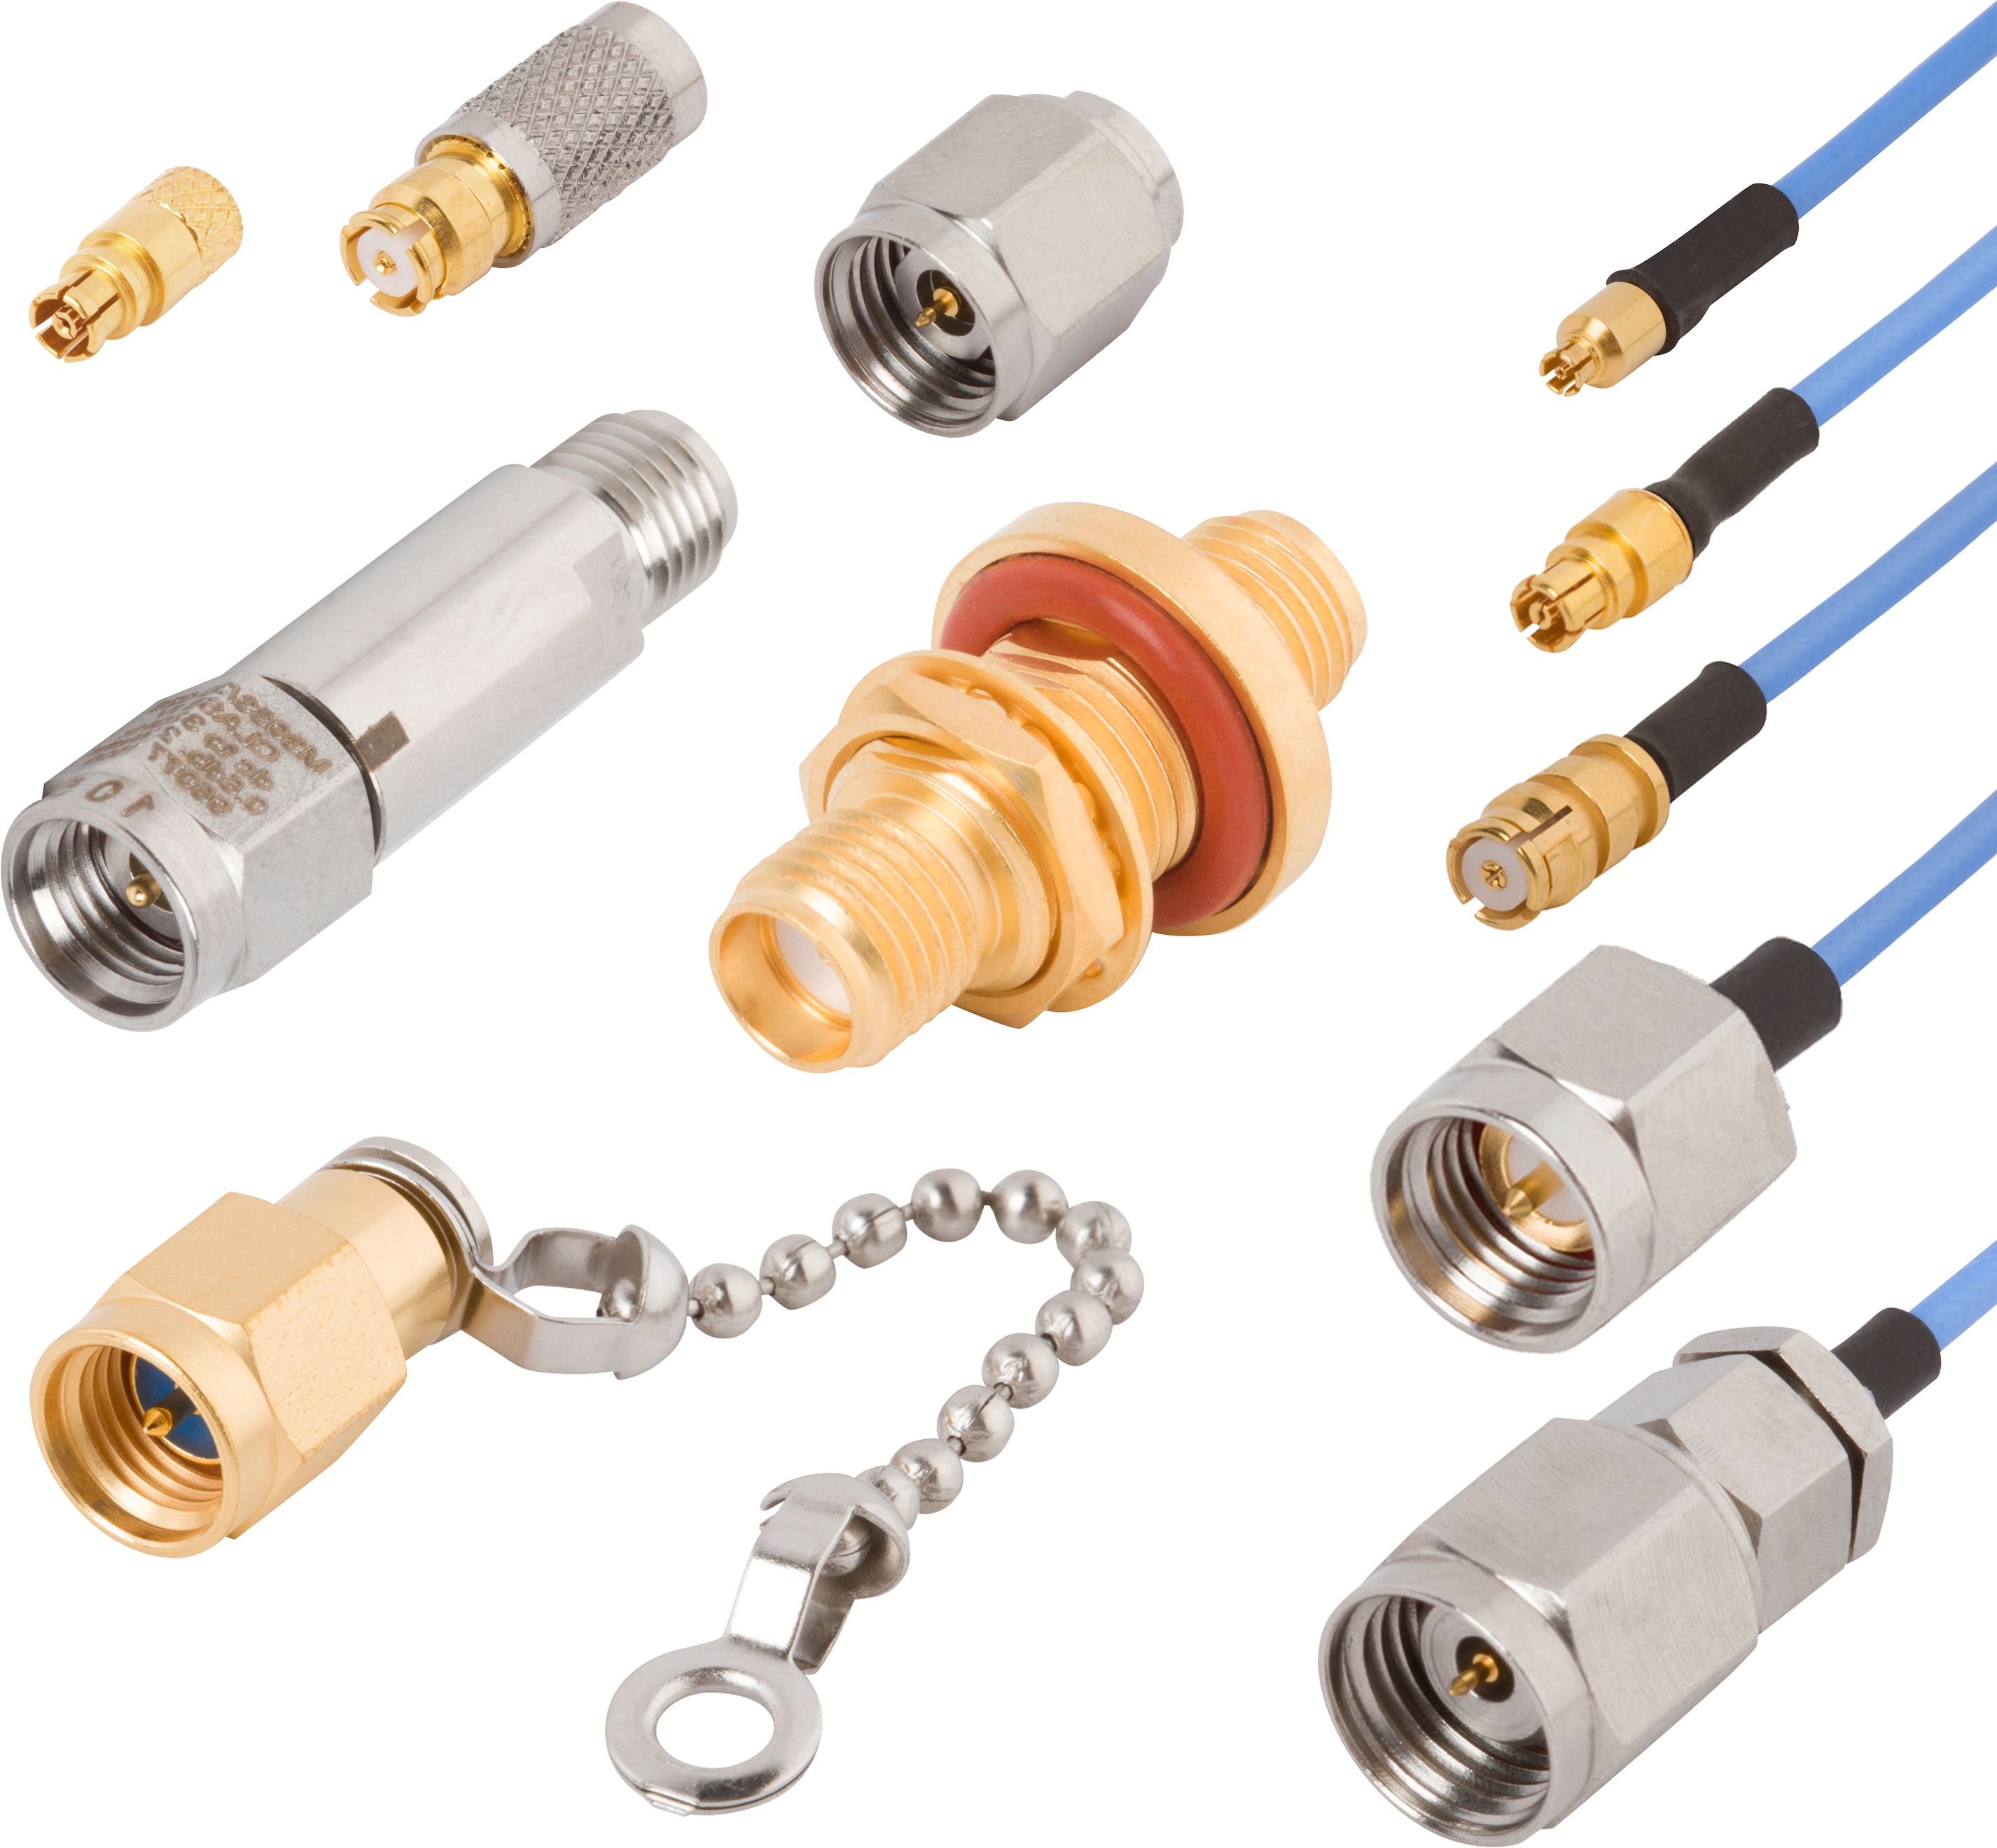 September 24, 2019 Connector Industry News - PEI-Genesis now stocks Amphenol SV Microwave interconnect solutions